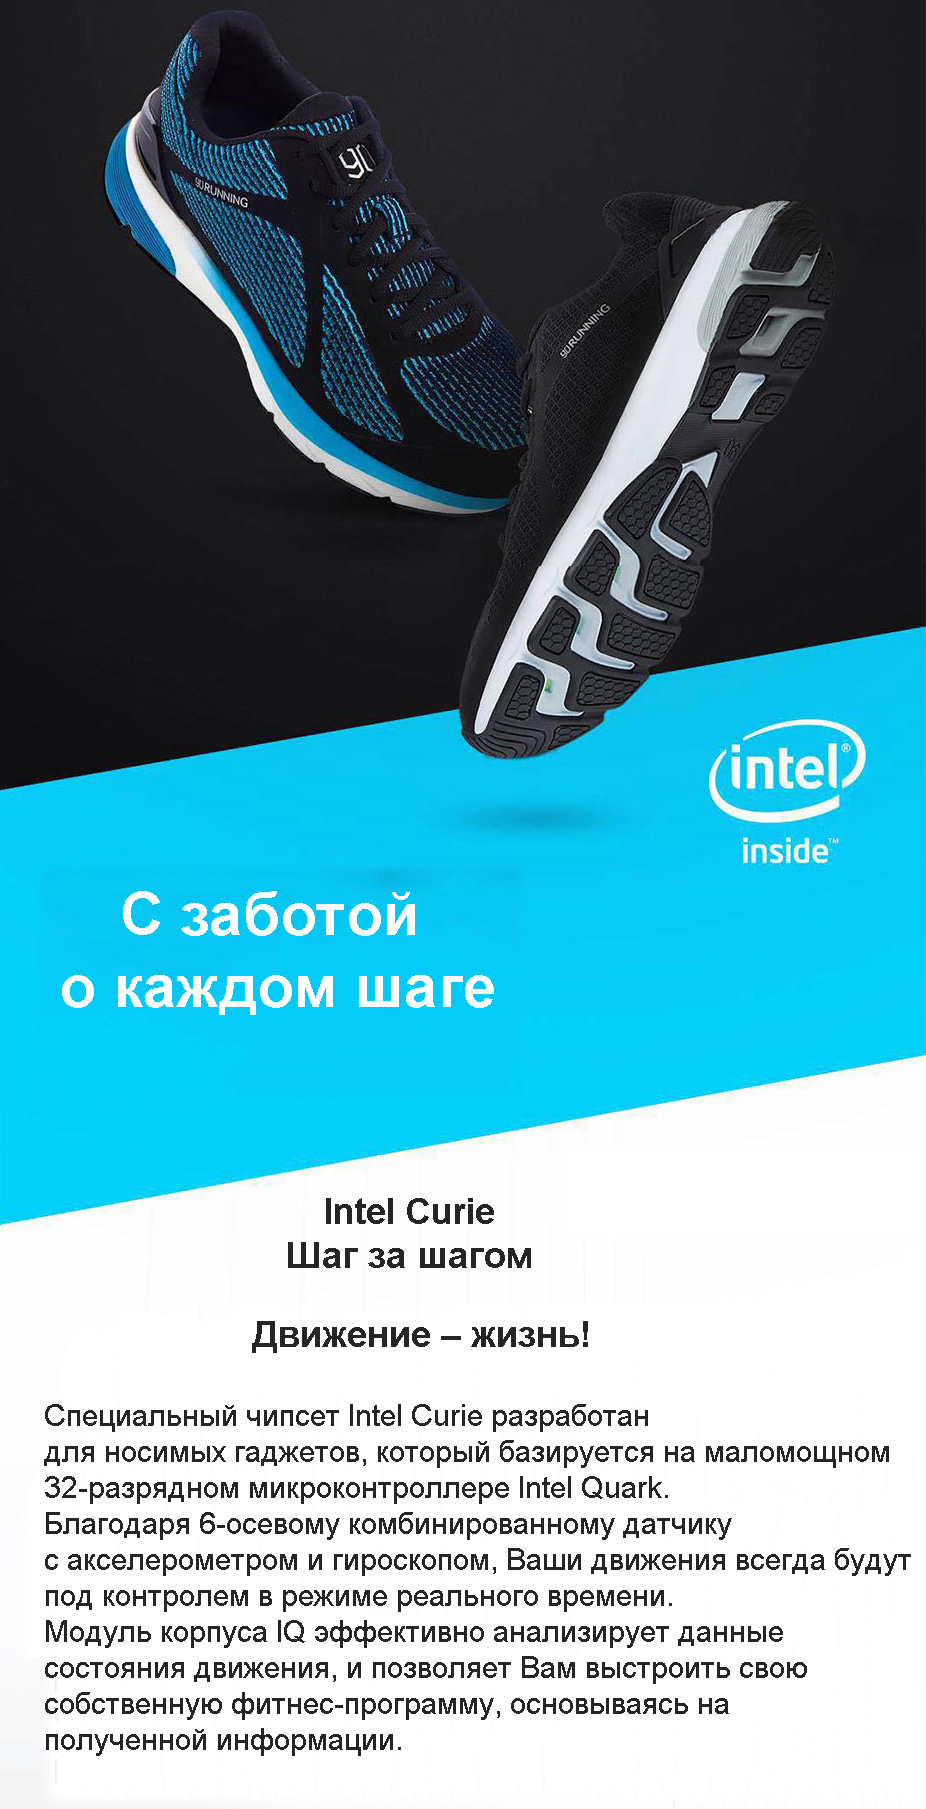 Кроссовки 90 Points Ultra Smart Running Shoes чип Intel Curie